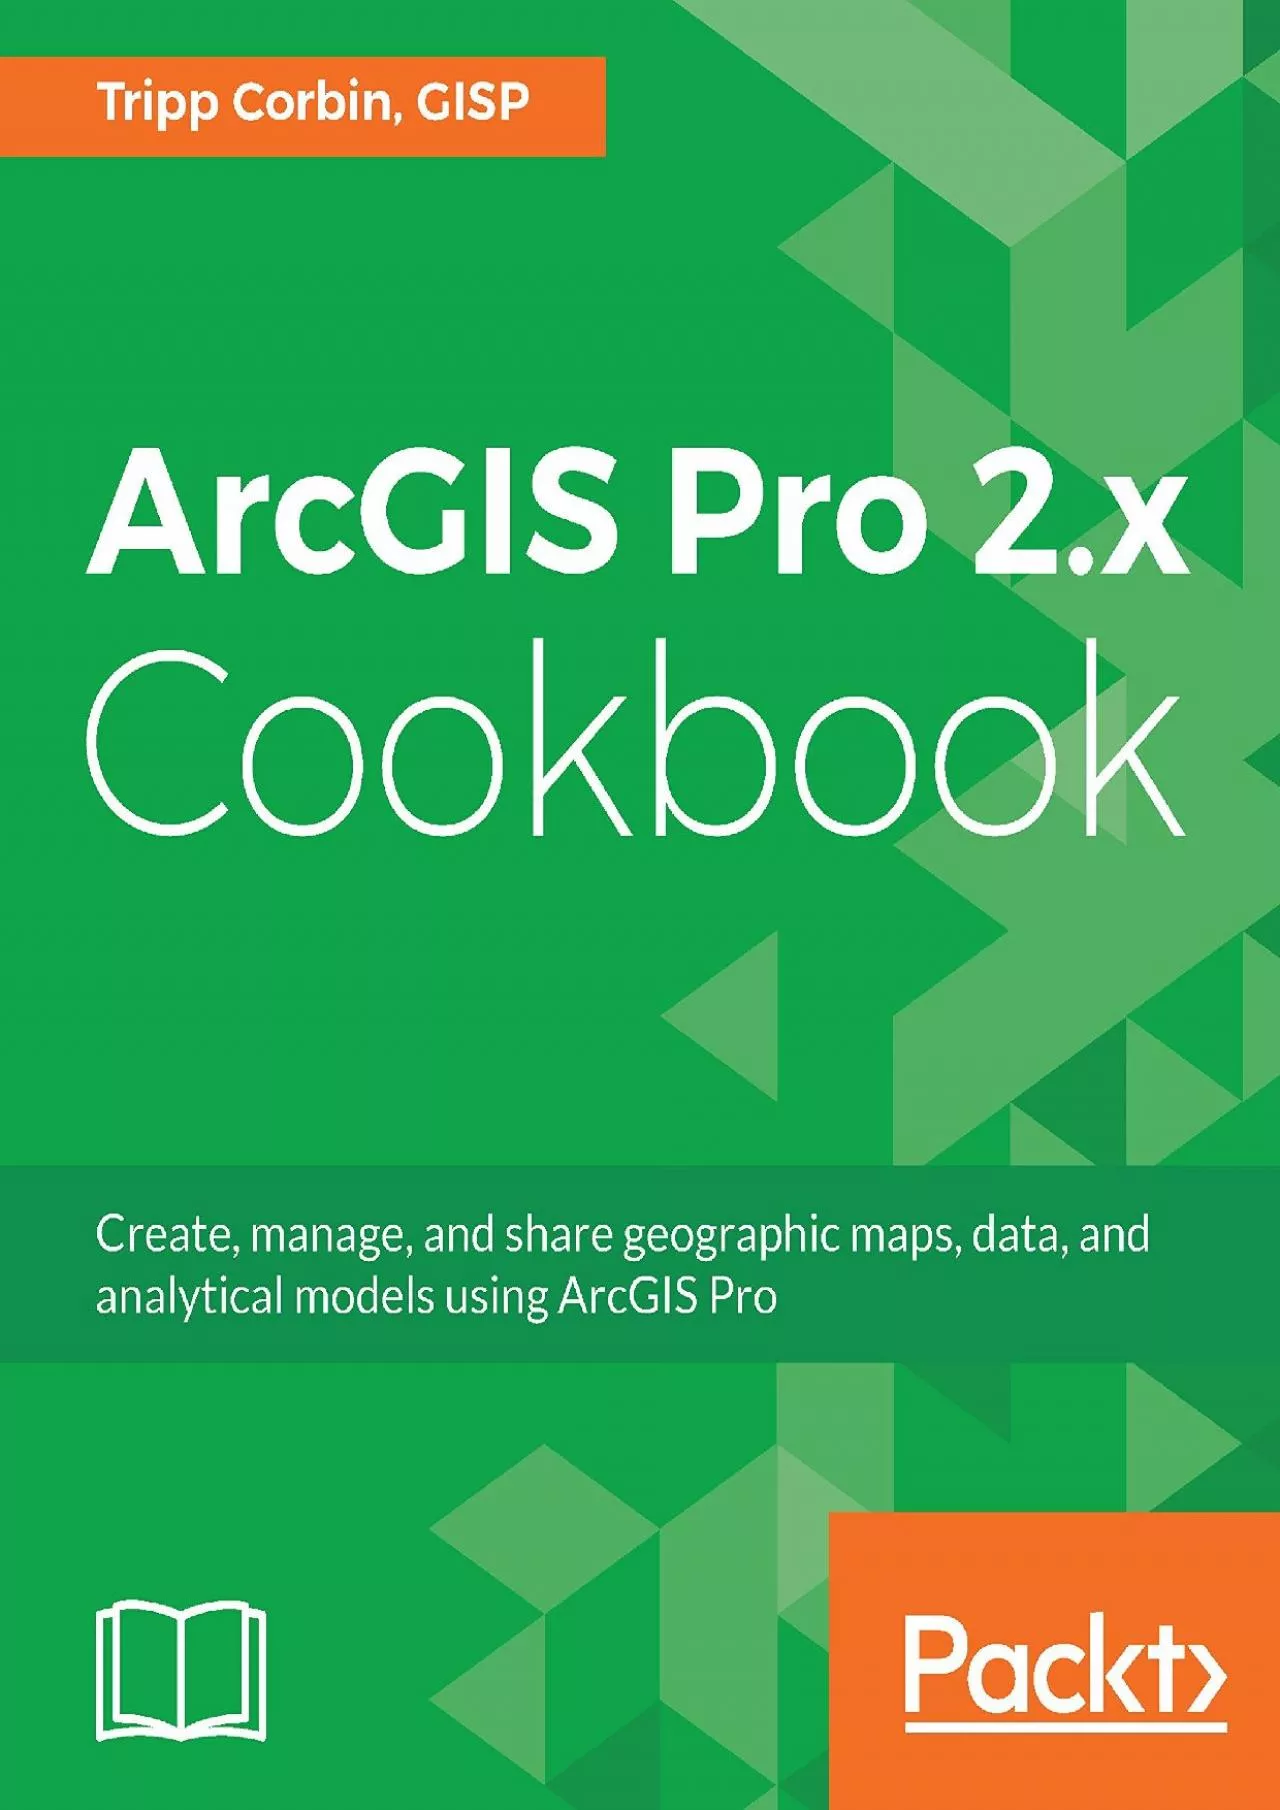 ArcGIS Pro 2.x Cookbook: Create, manage, and share geographic maps, data, and analytical